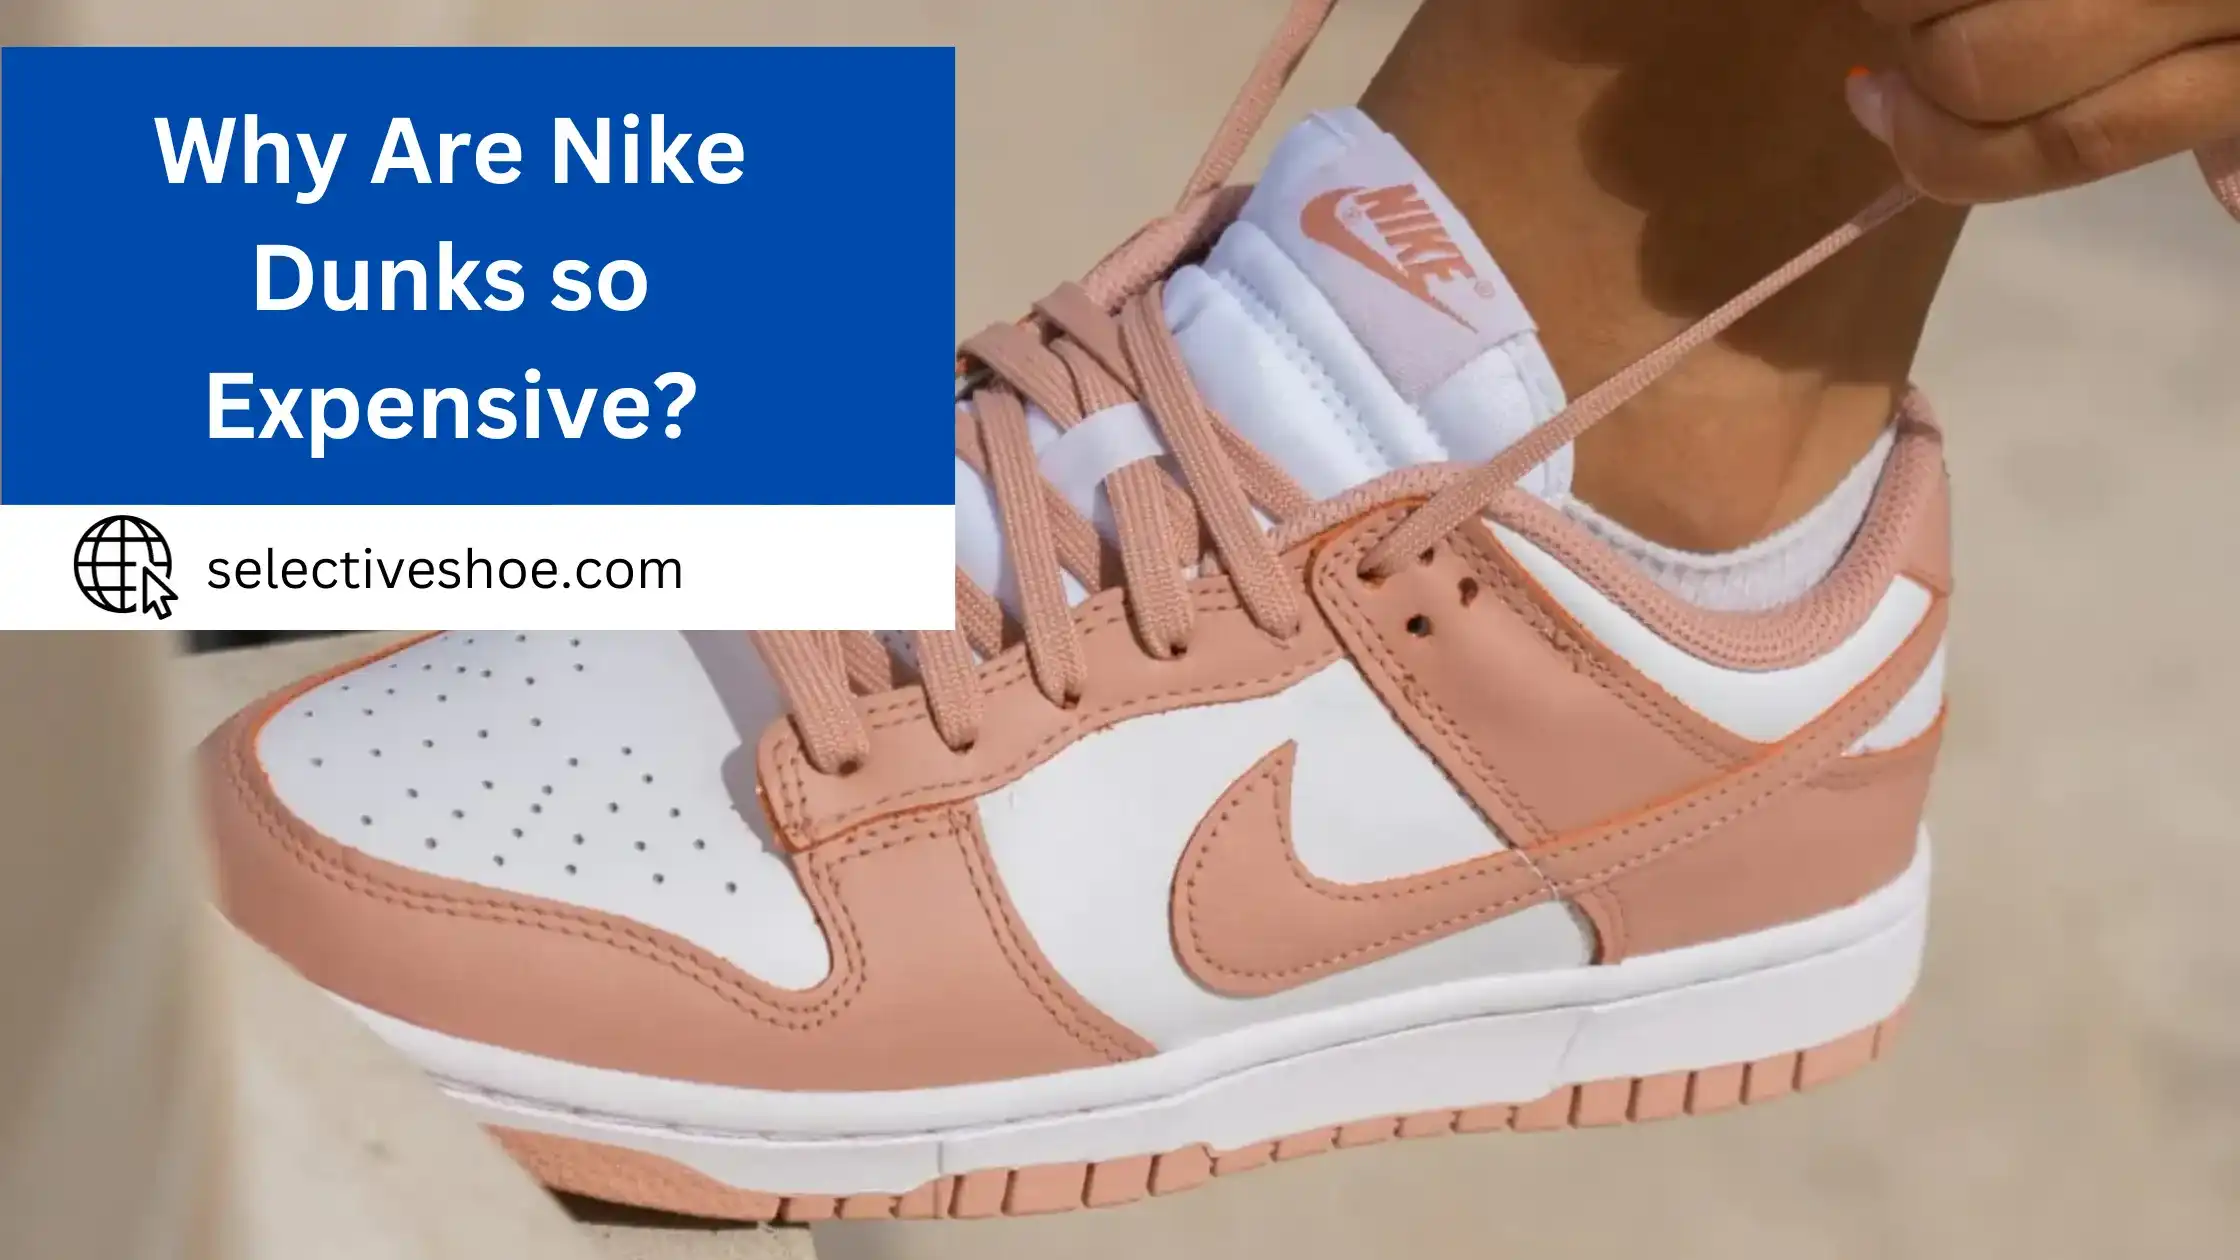 Why Are Nike Dunks So Expensive? Best Explained